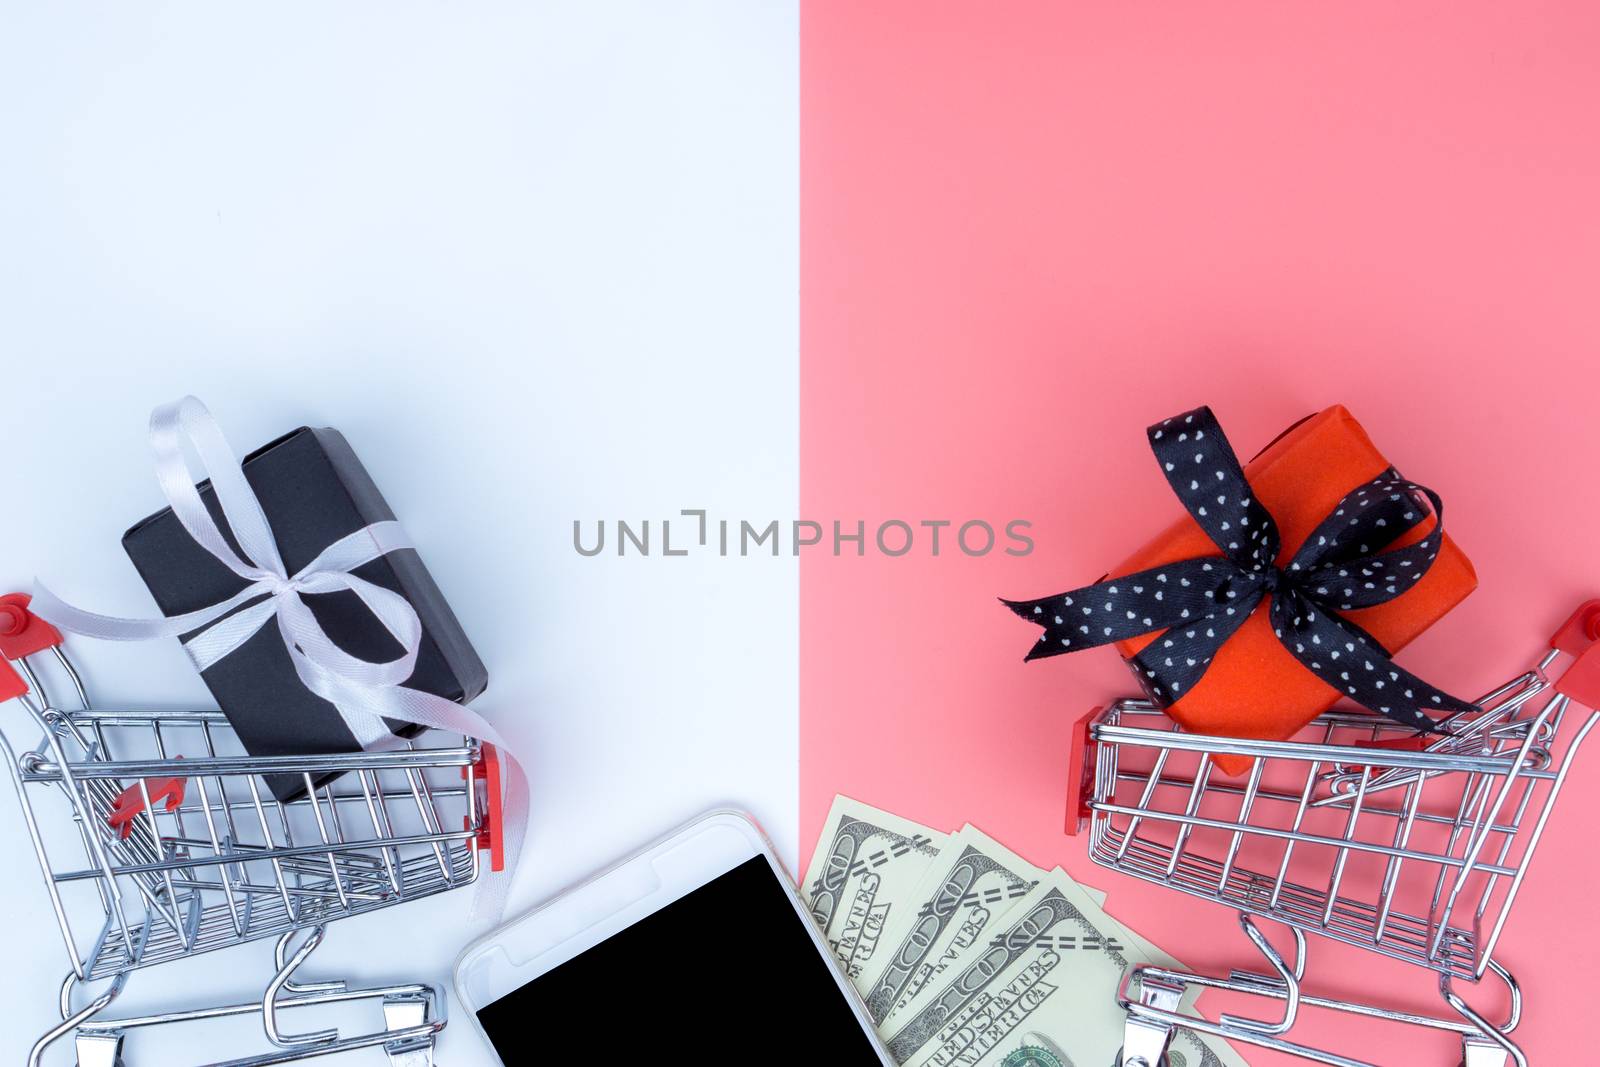 Online shopping of China, The shopping cart and Christmas boxes with black ribbon and smartphone and banknote on a white background with copy space for text. 11.11 single's day sale concept